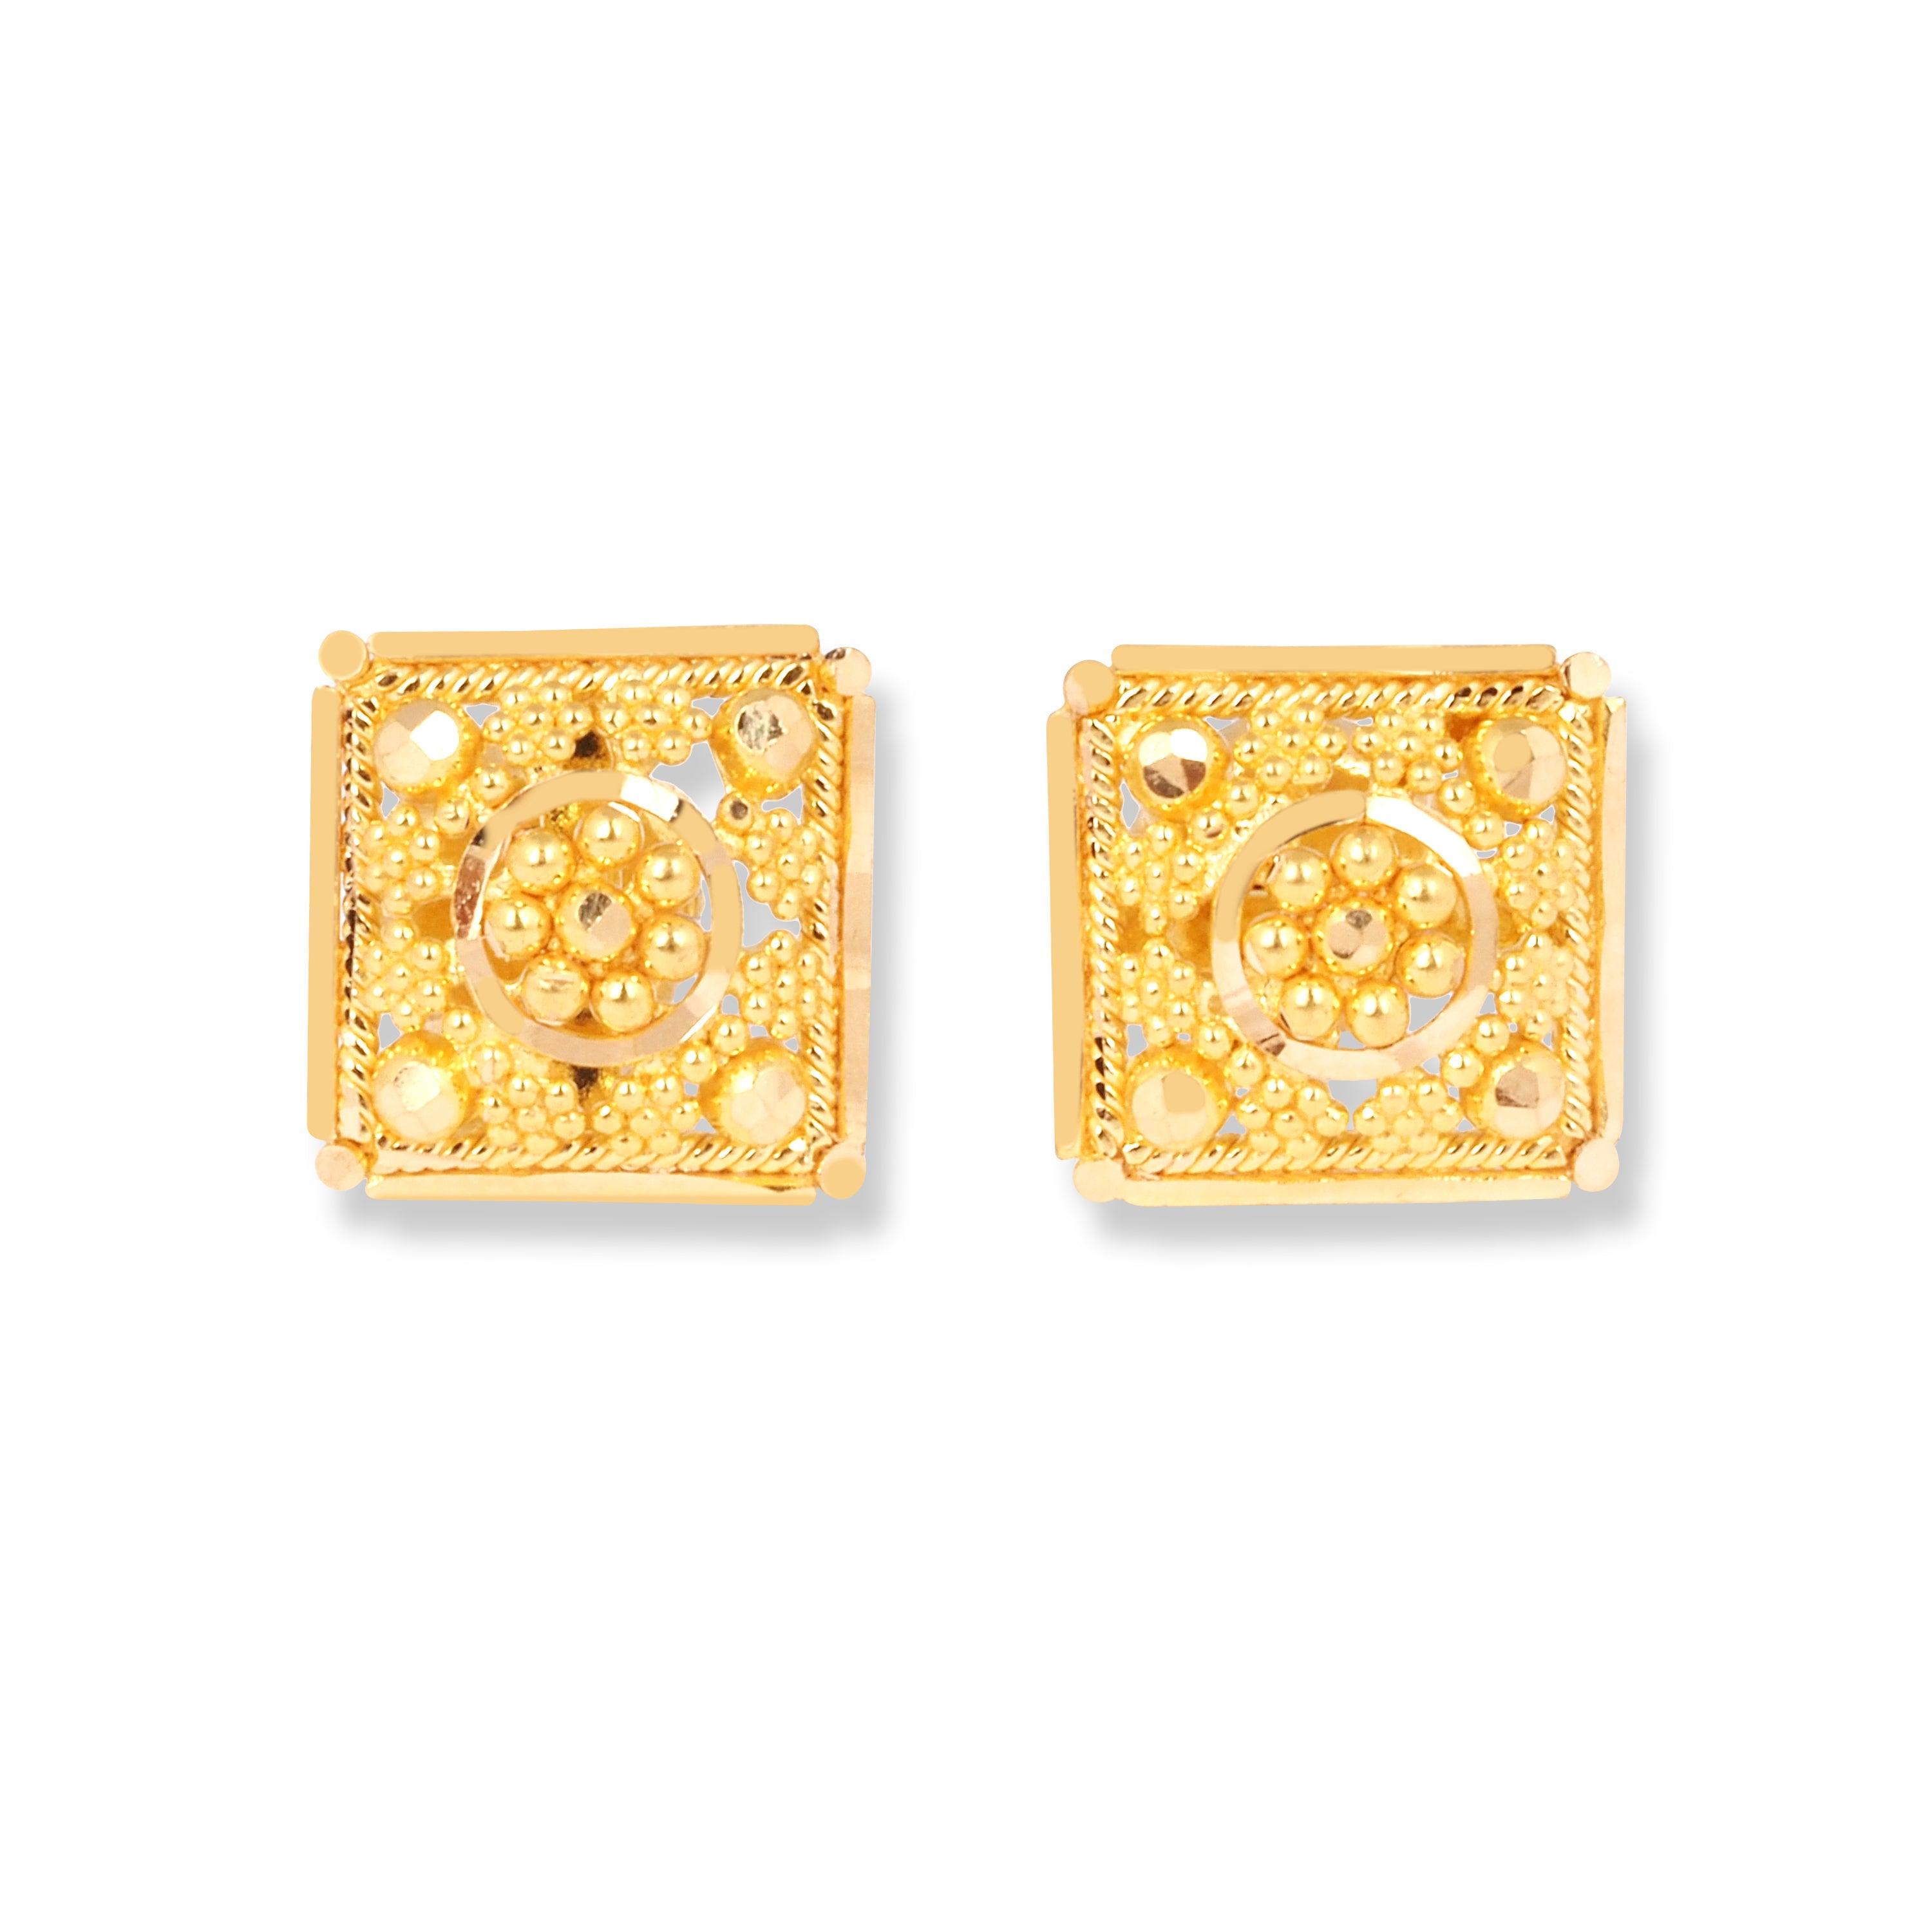 22ct Gold Earrings with Filigree Design (4.3g) E-7881 - Minar Jewellers